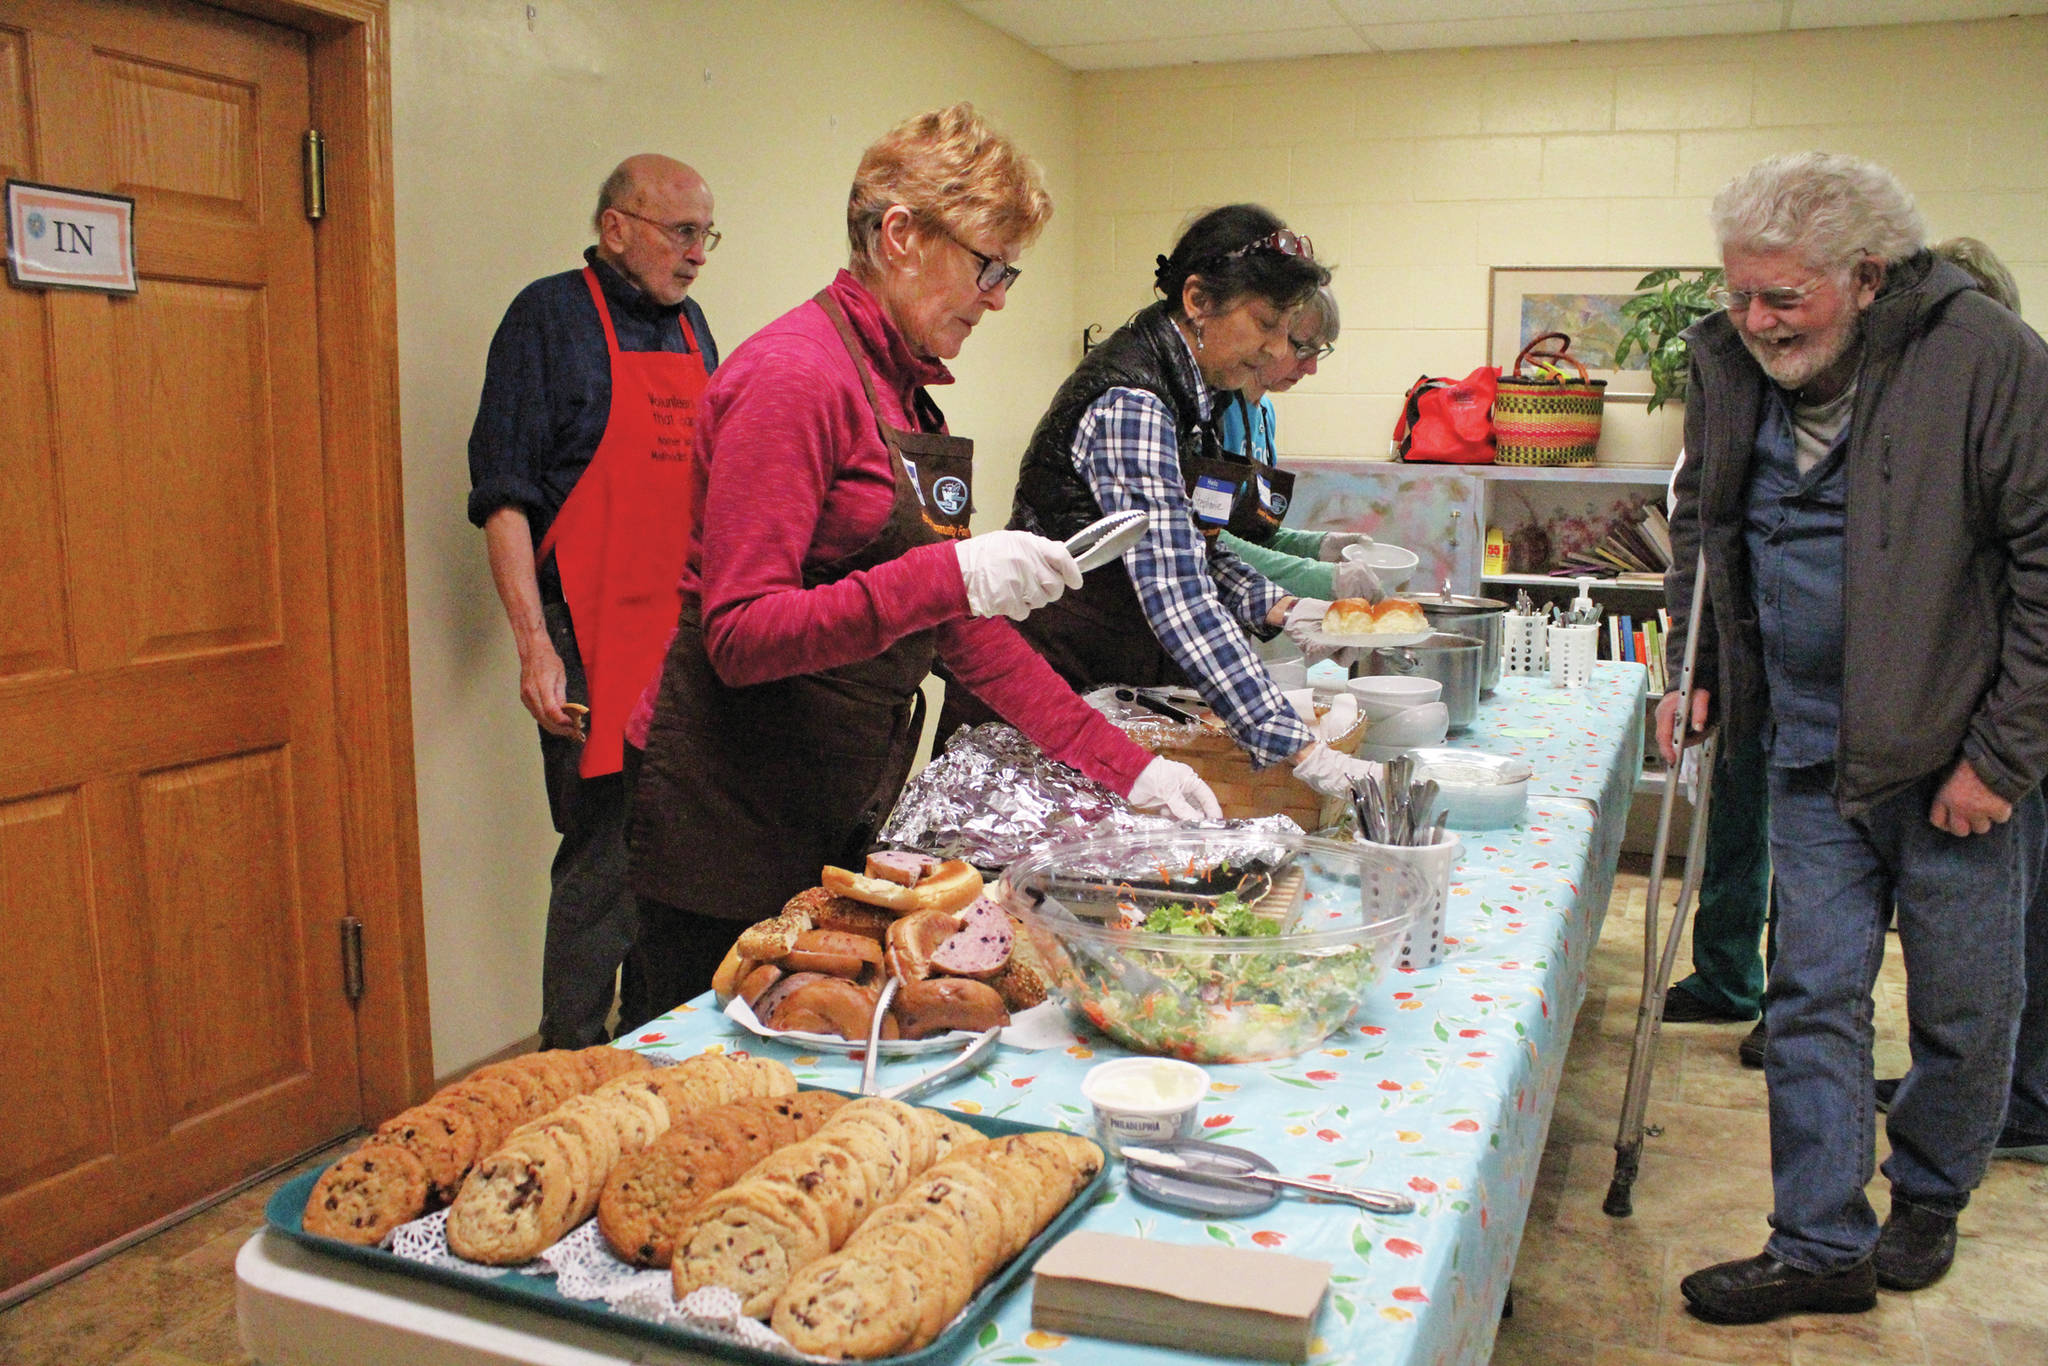 Volunteers distibute a meal to attendees at Project Homeless Connect on Jan. 29, 2020 at Homer United Methodist Church in Homer, Alaska. The event is a one-day opportunity for the homeless to get access to necessary supplies and services. (Photo by Megan Pacer/Homer News)